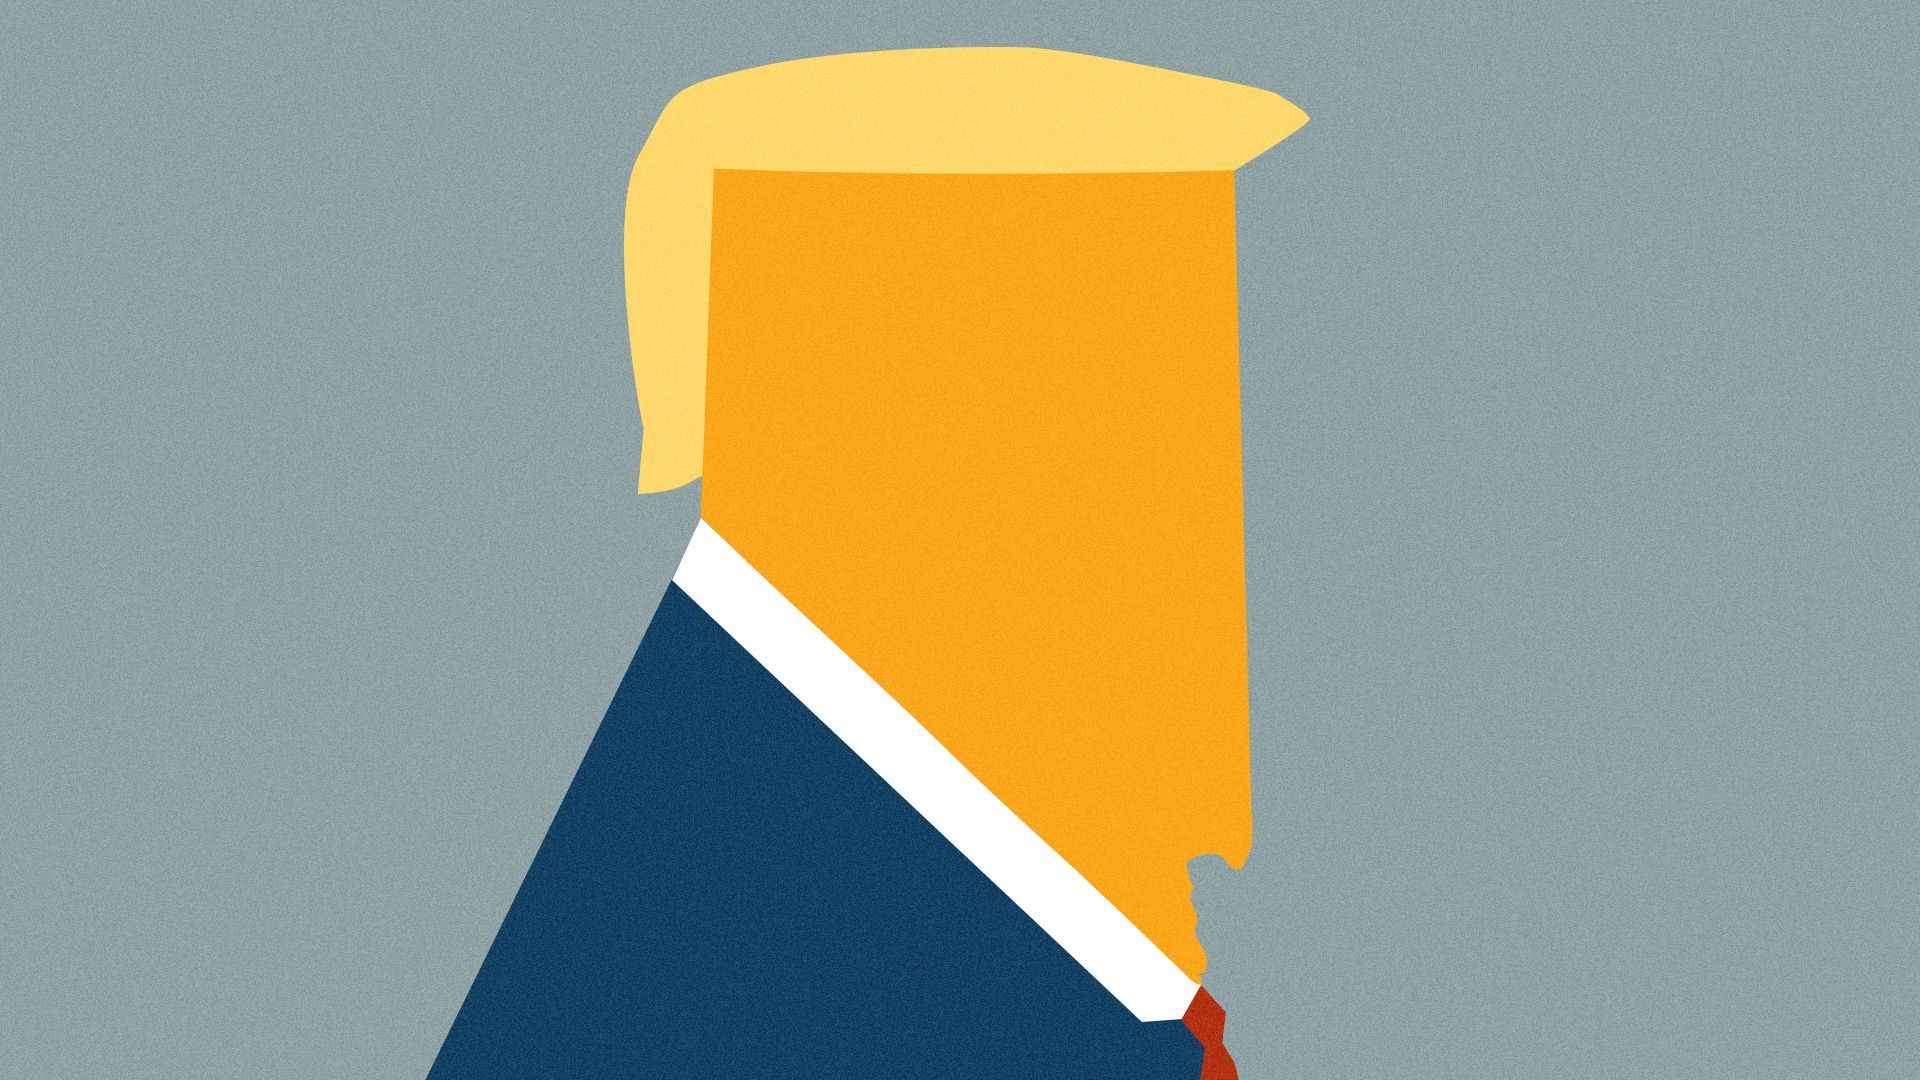 Illustration of the state of Nevada forming a profile of Donald Trump's face.